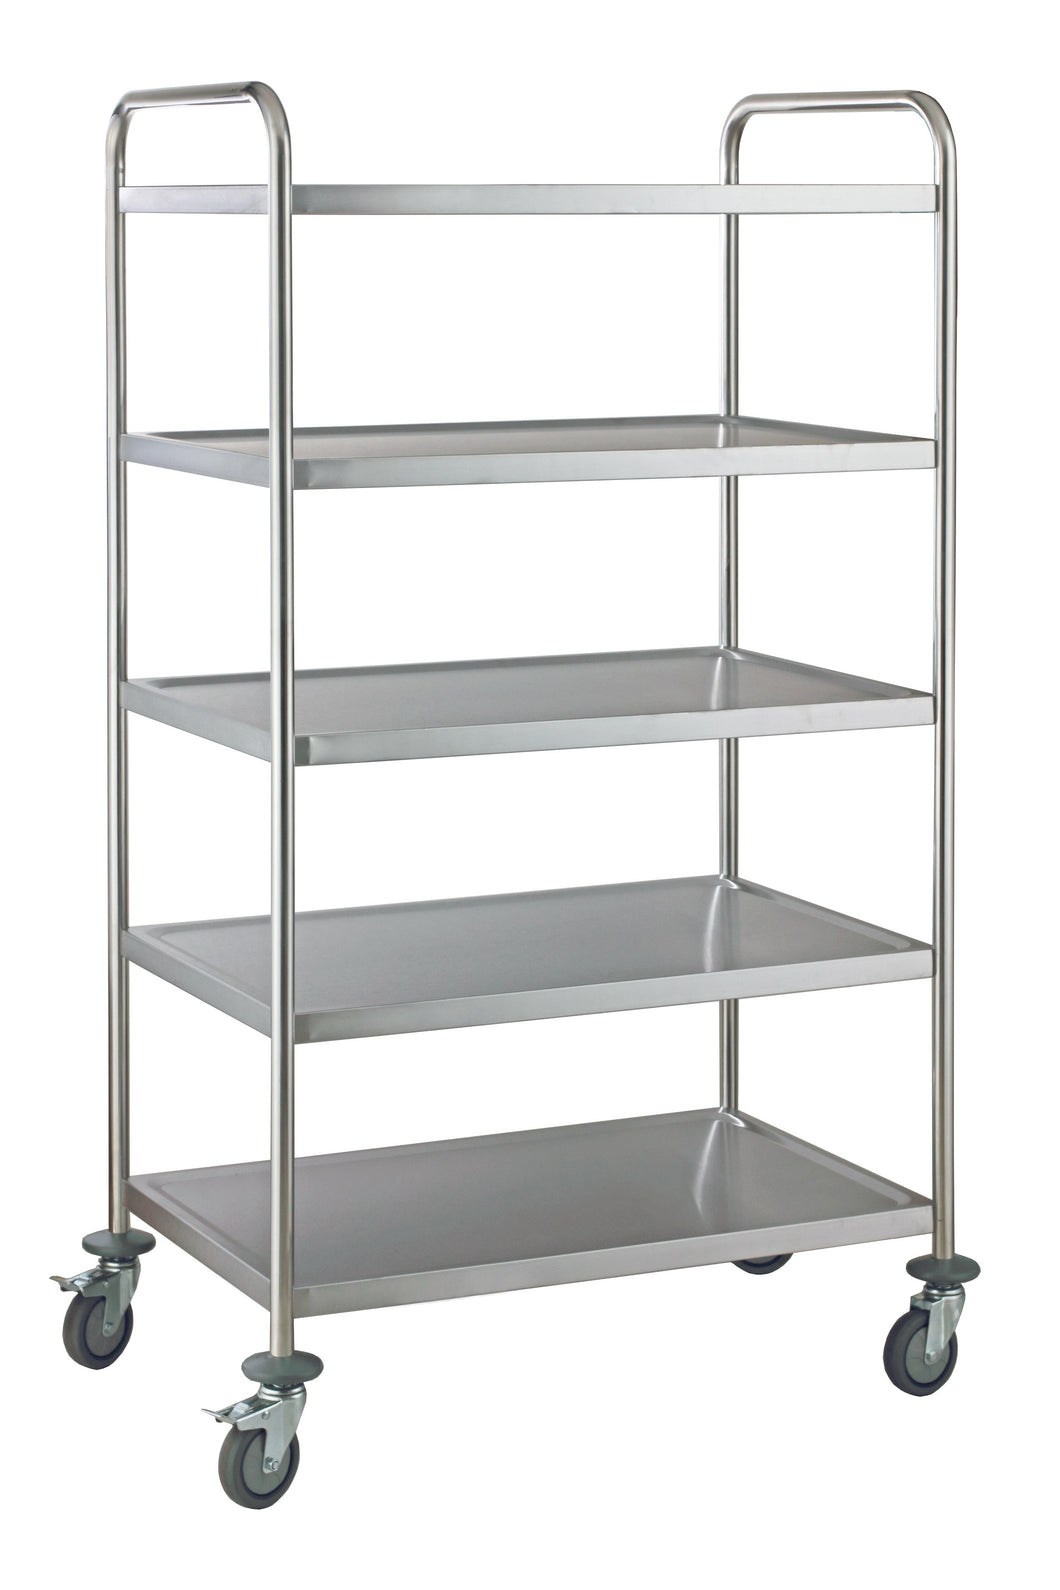 5 Tier Stainless Steel Serving / Clearing / Catering Trolley